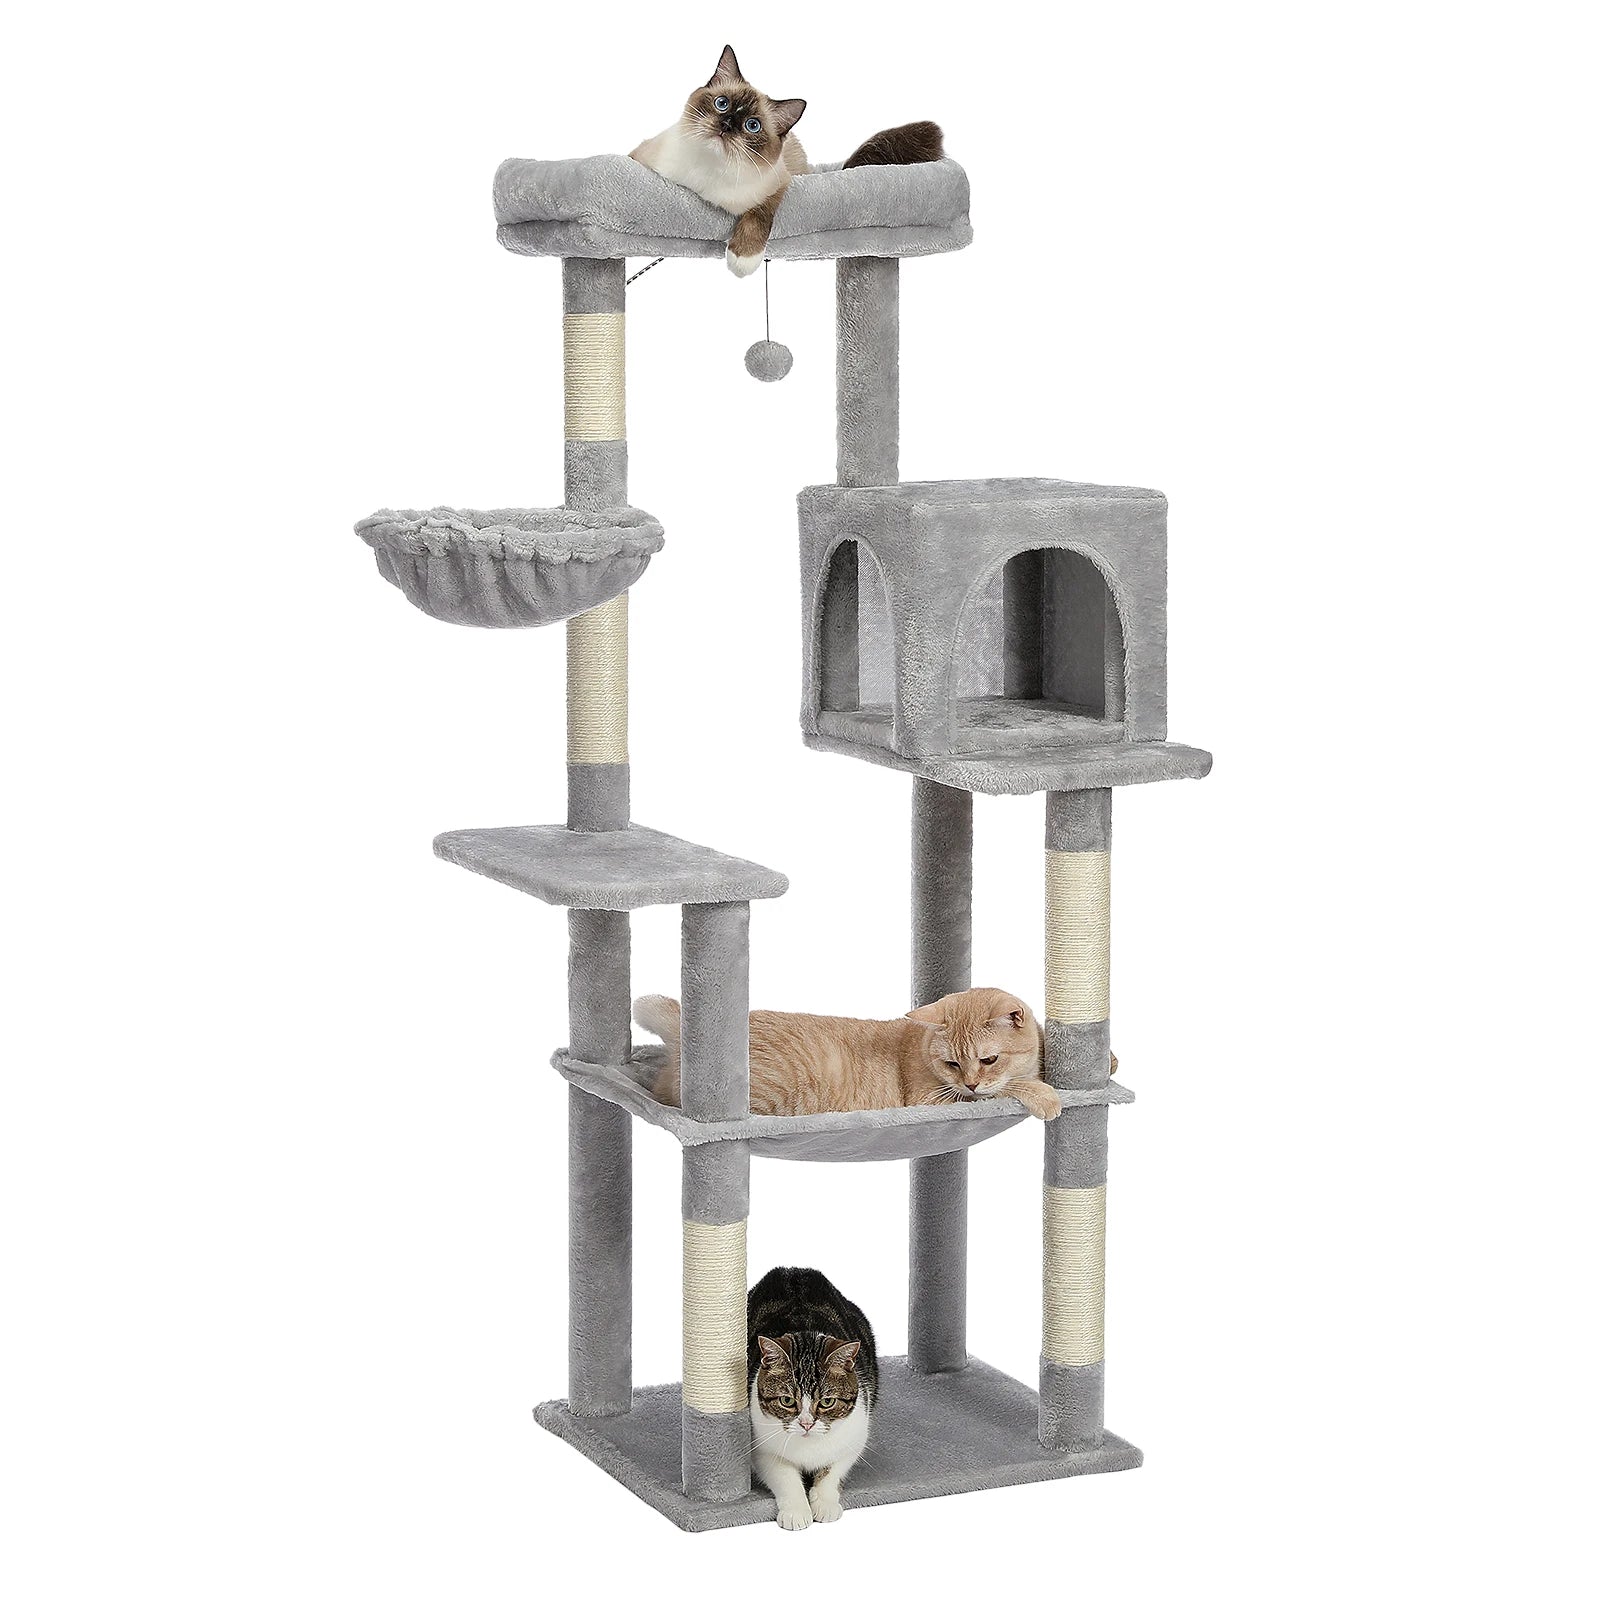 Pet Cat Jumping Toy with Ladder Scratching Wood Climbing Tree for Cat Climbing Frame Cat Furniture Scratching Post #0201